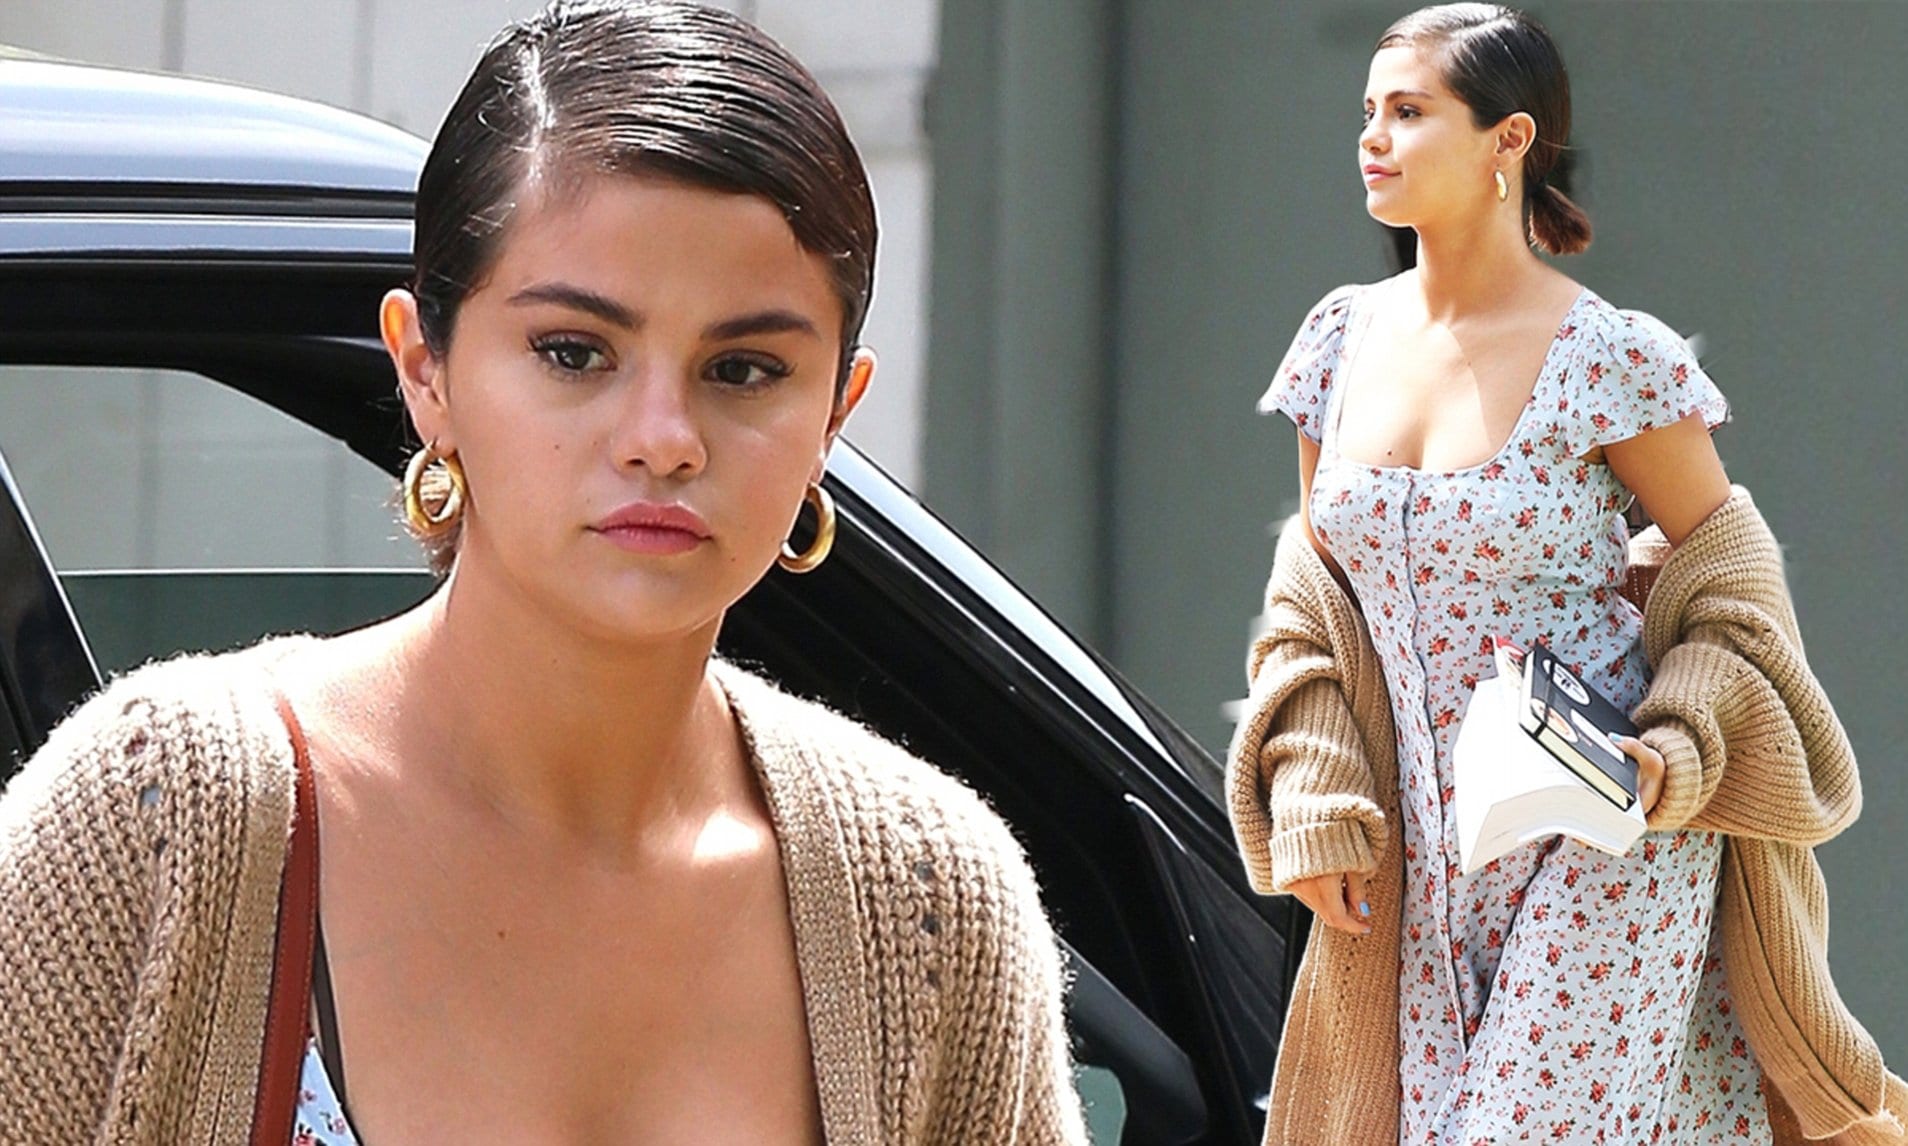 Selena Gomez dons floral dress and slouchy sweater for Easter Sunday church services in Los Angeles